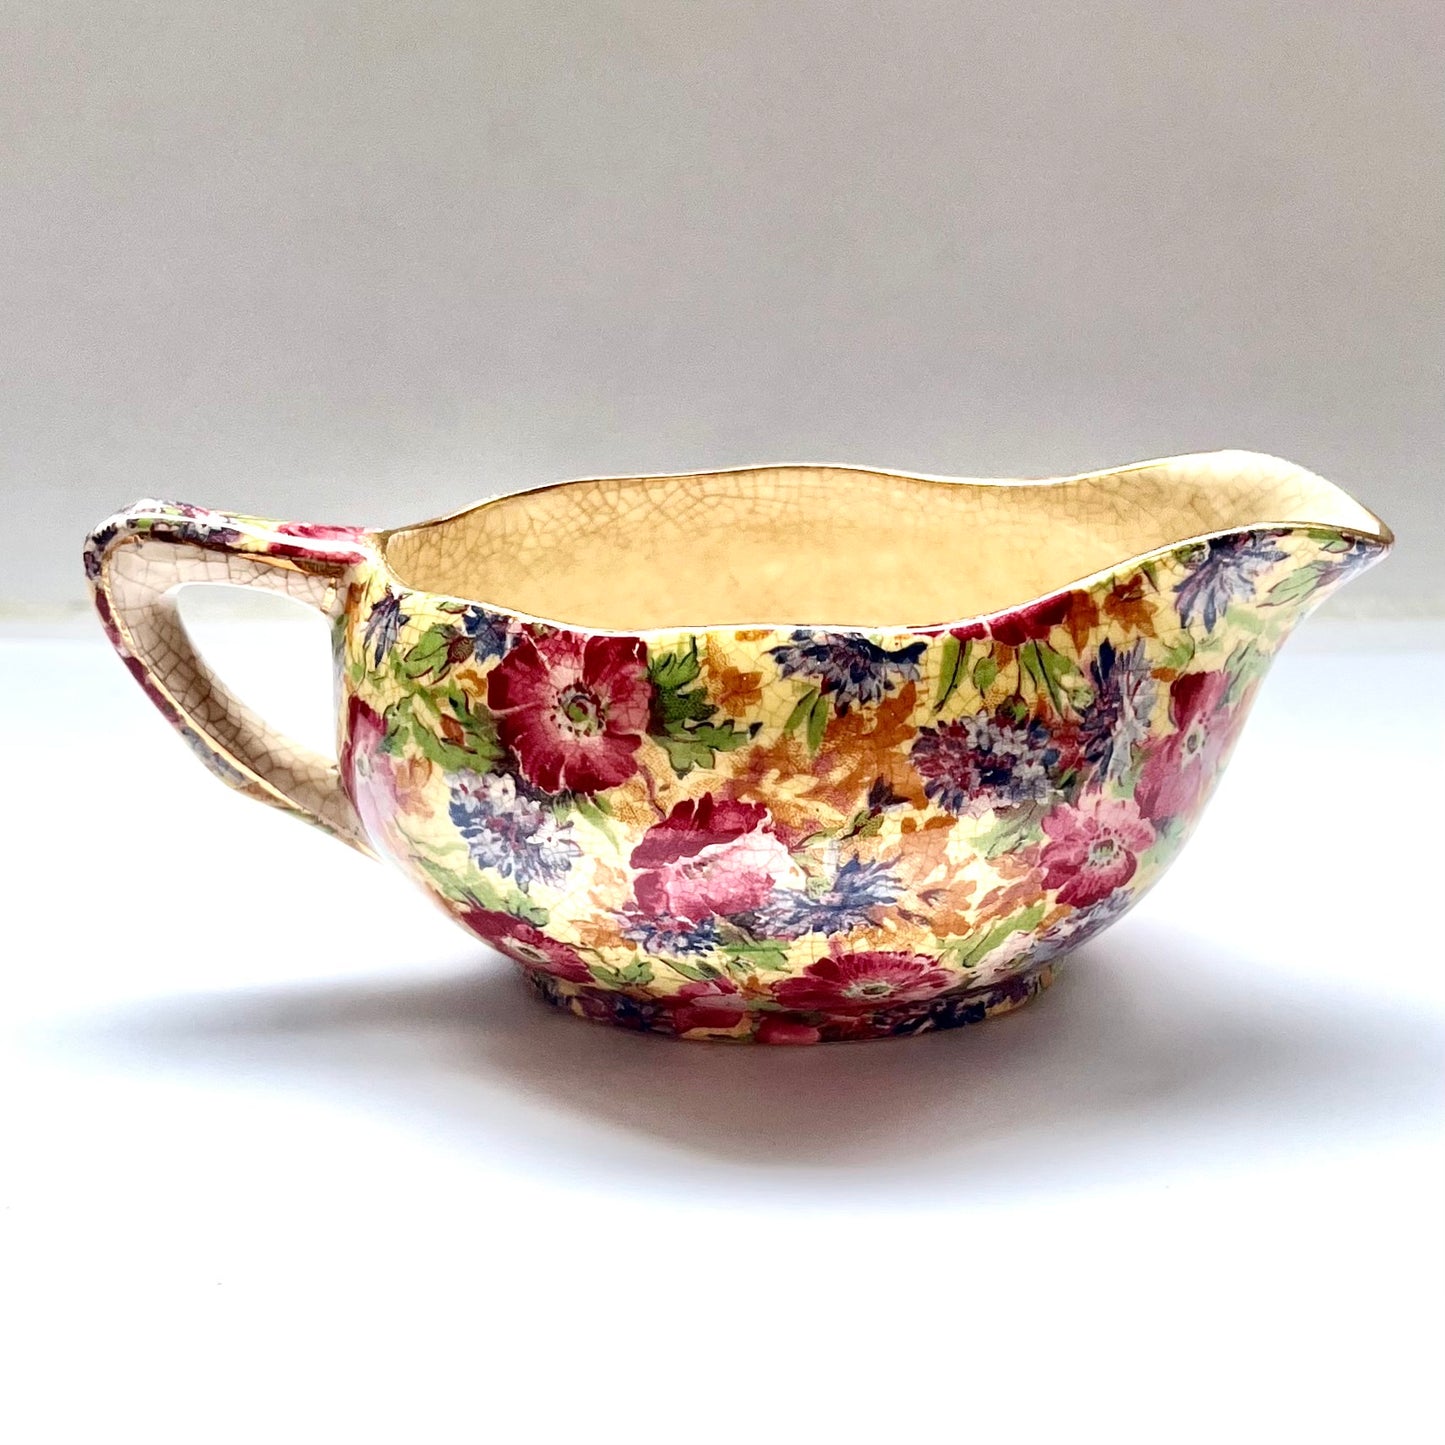 1930s to 1940s Royal Winton Grimwades Australia sauce boat in Royalty floral chintz pattern